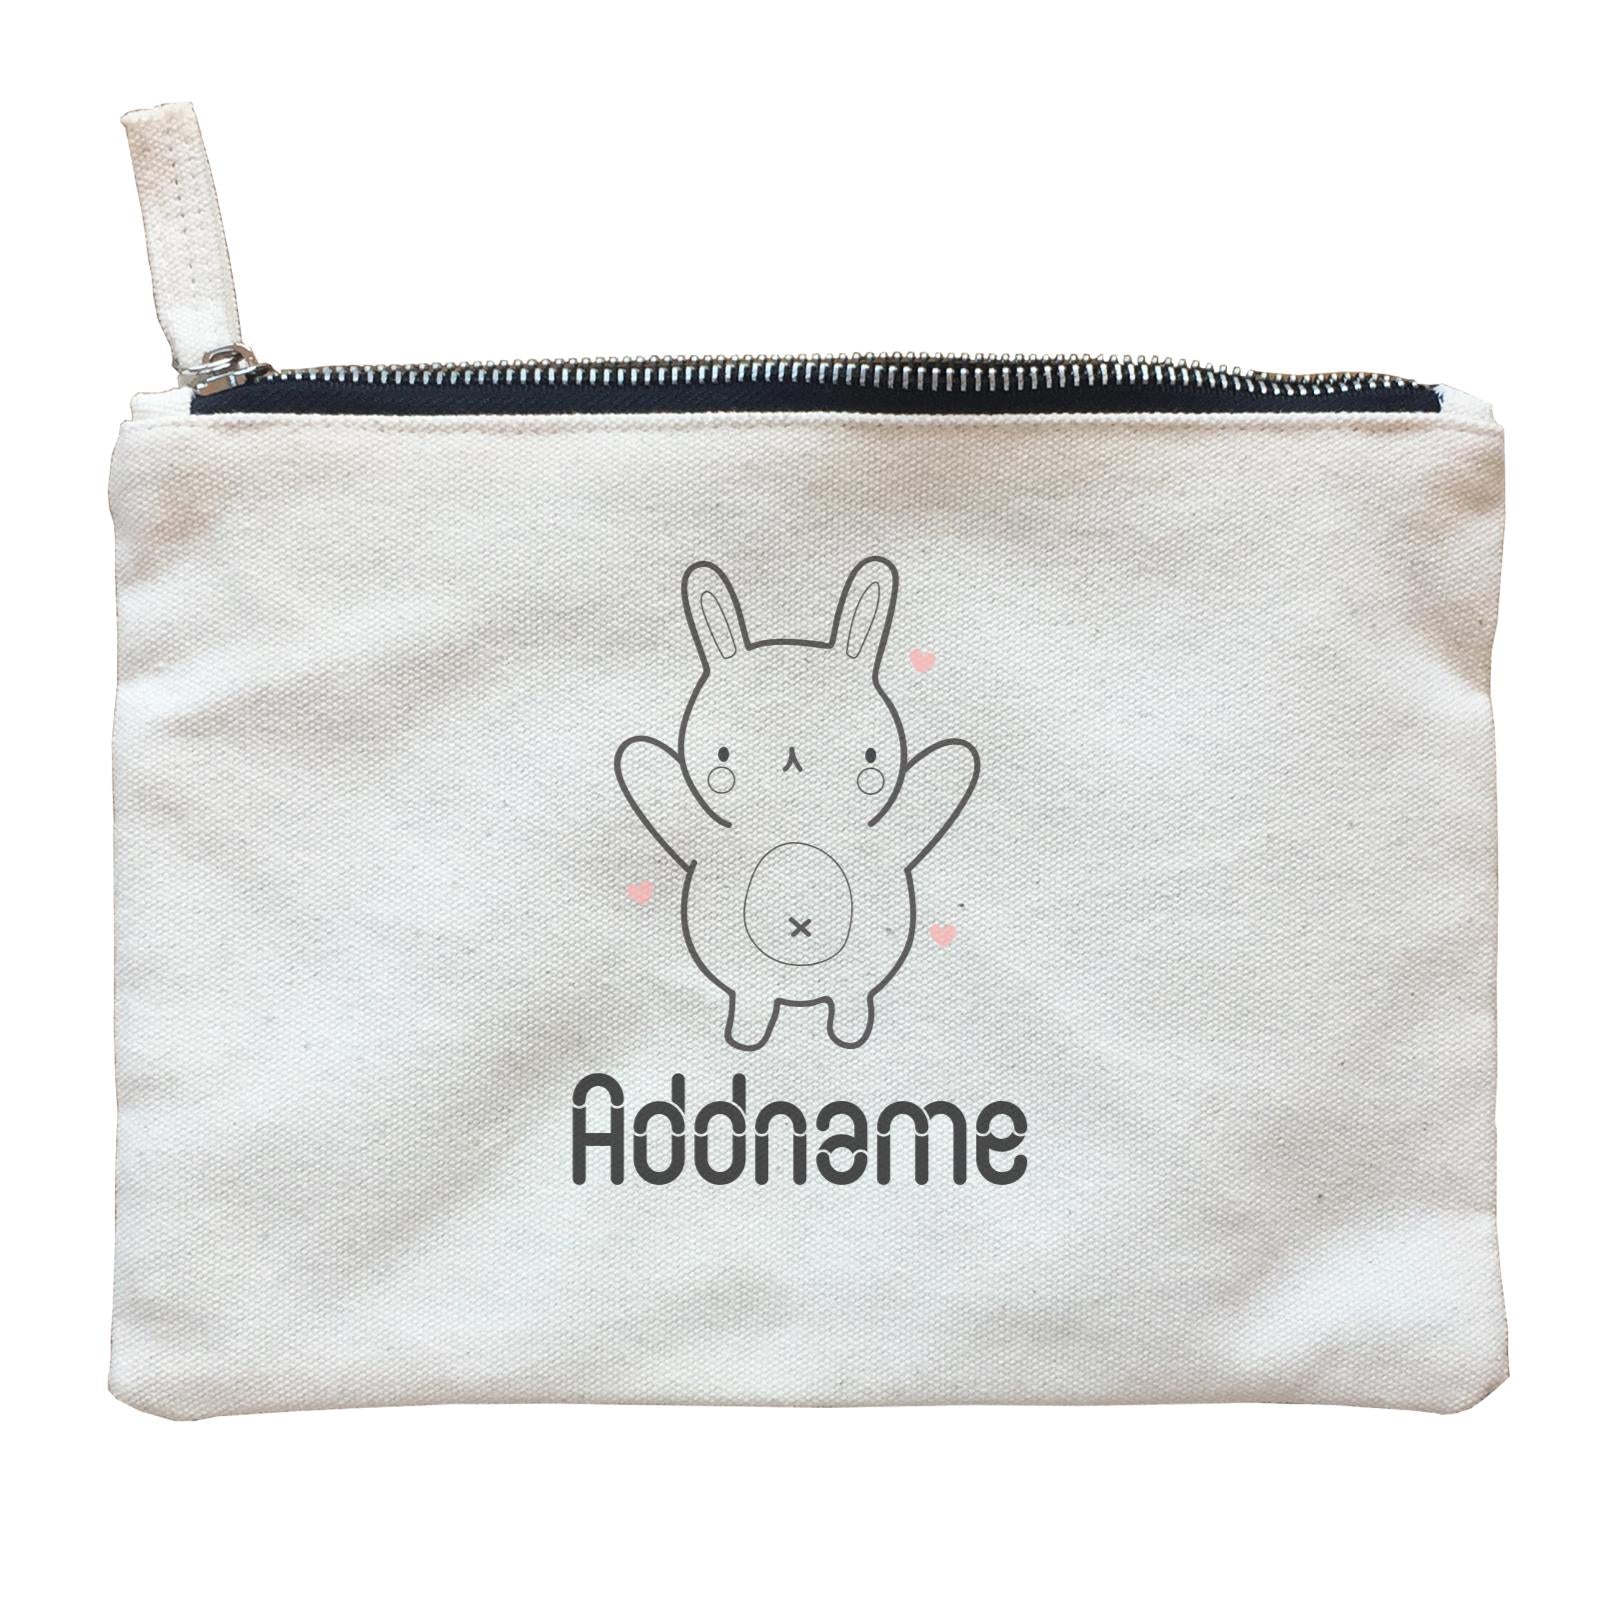 Coloring Outline Cute Hand Drawn Animals Cute Rabbit Addname Zipper Pouch